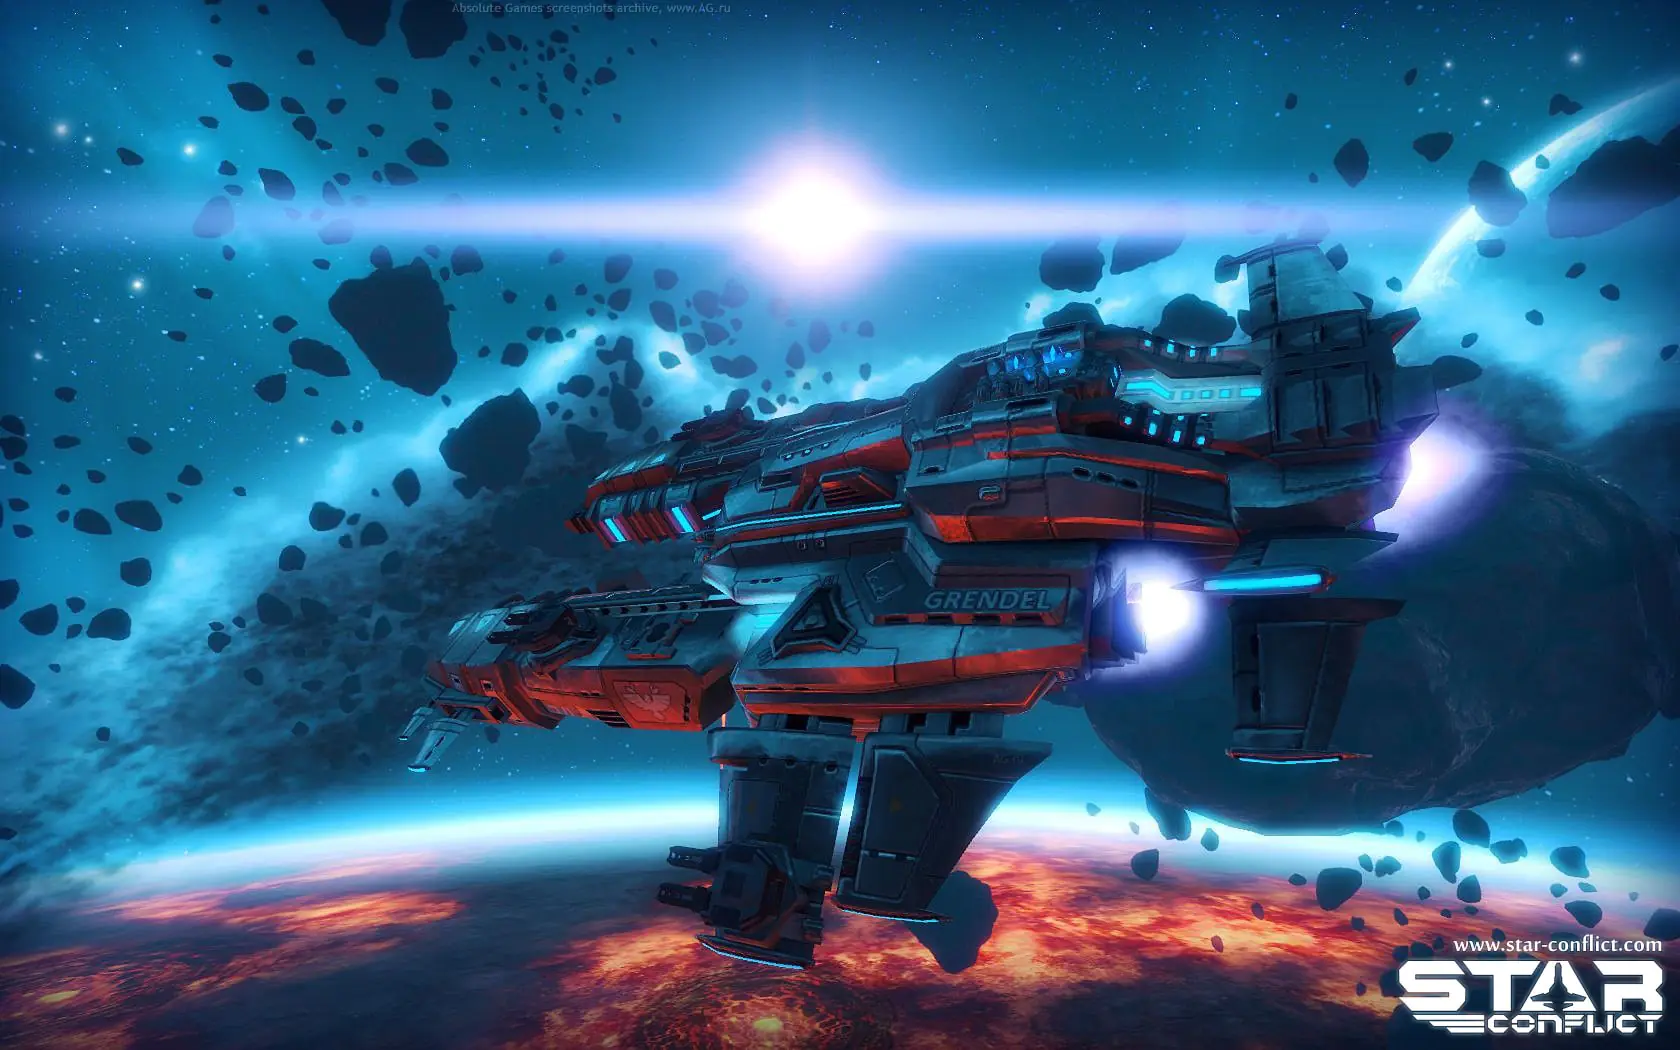 Star Conflict image 5